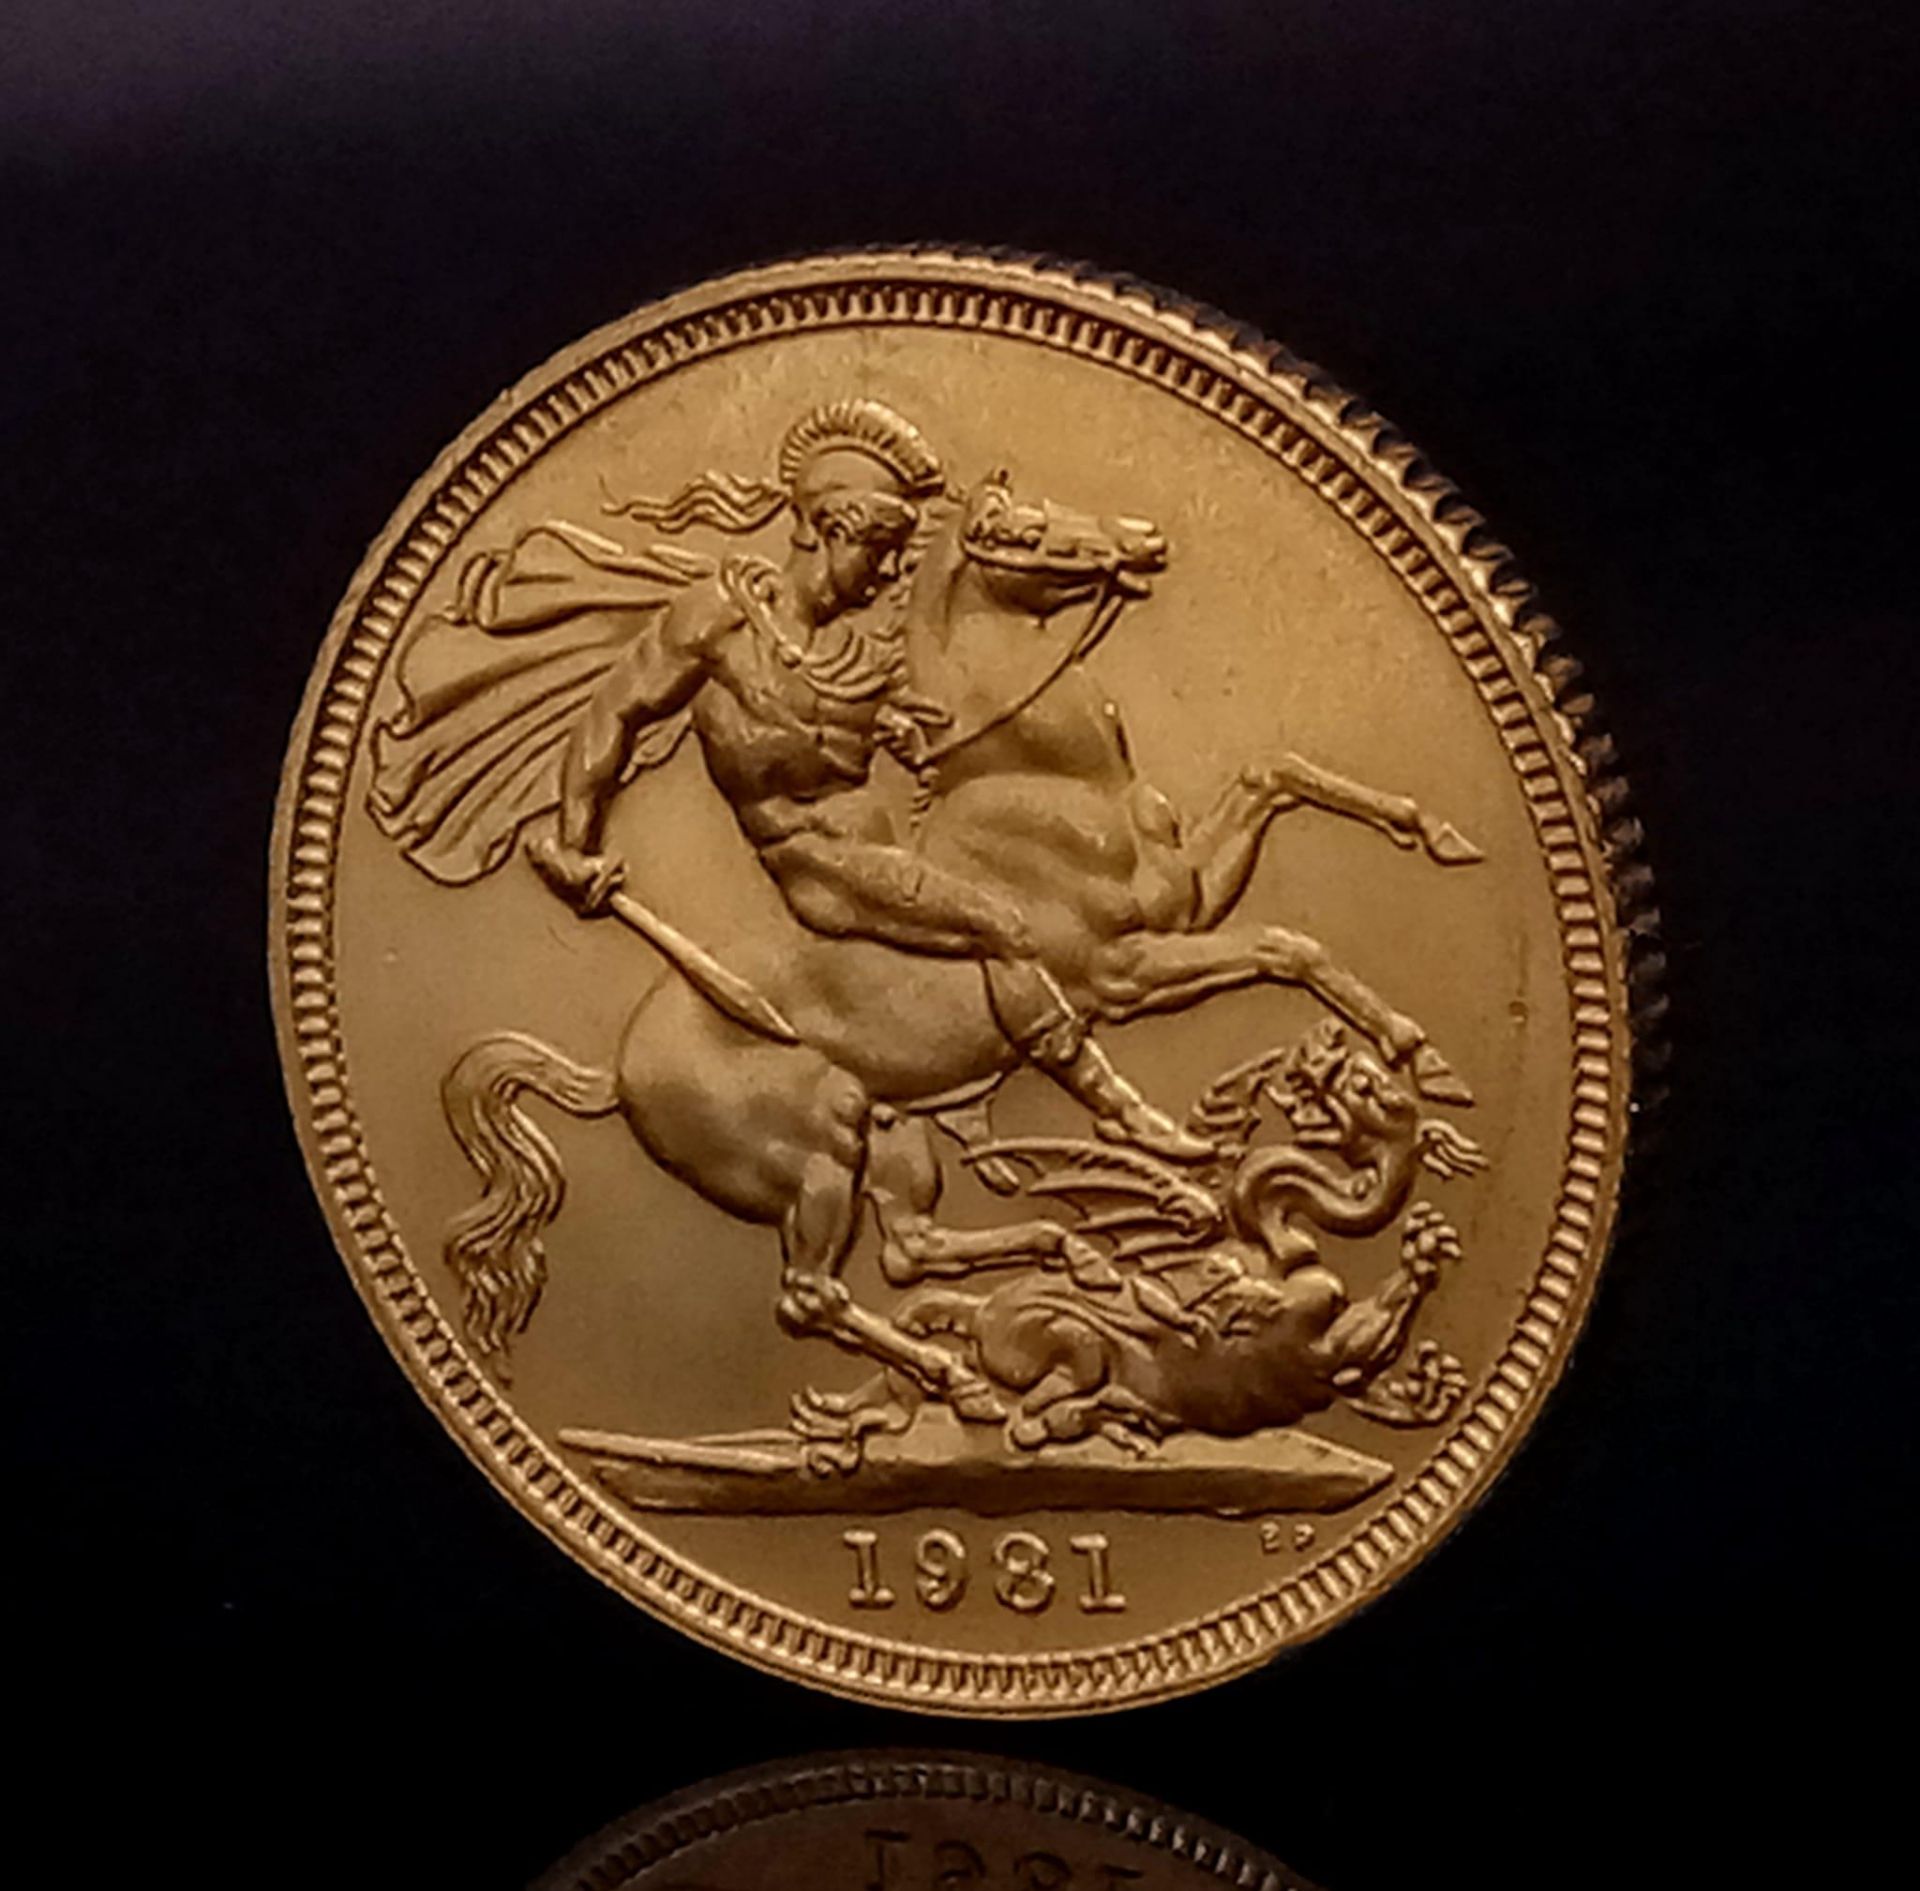 A 1981 22k Gold Elizabeth II Full Sovereign. Comes in original case. EF but please see photos.